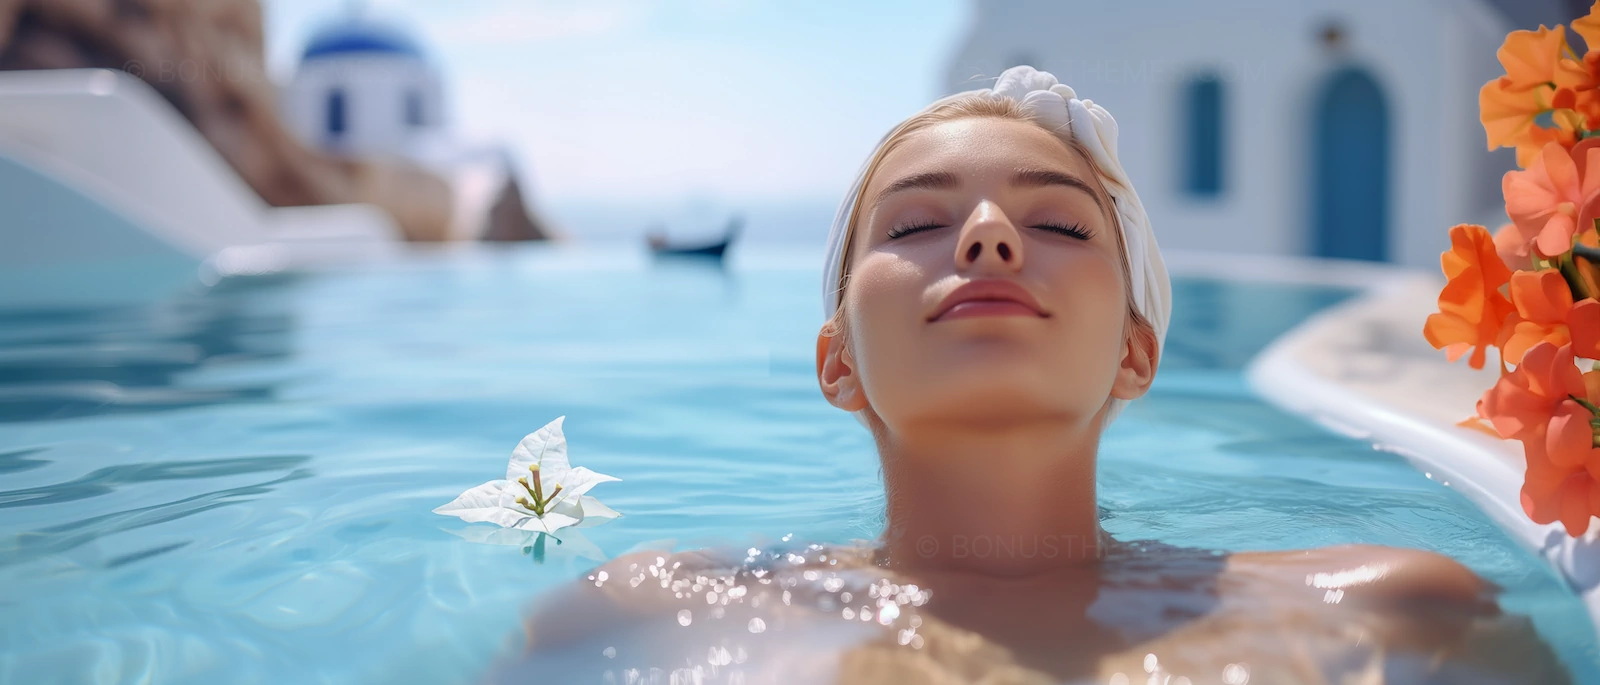 Tranquil Santorini Spa, woman relaxing by pool amidst flowers